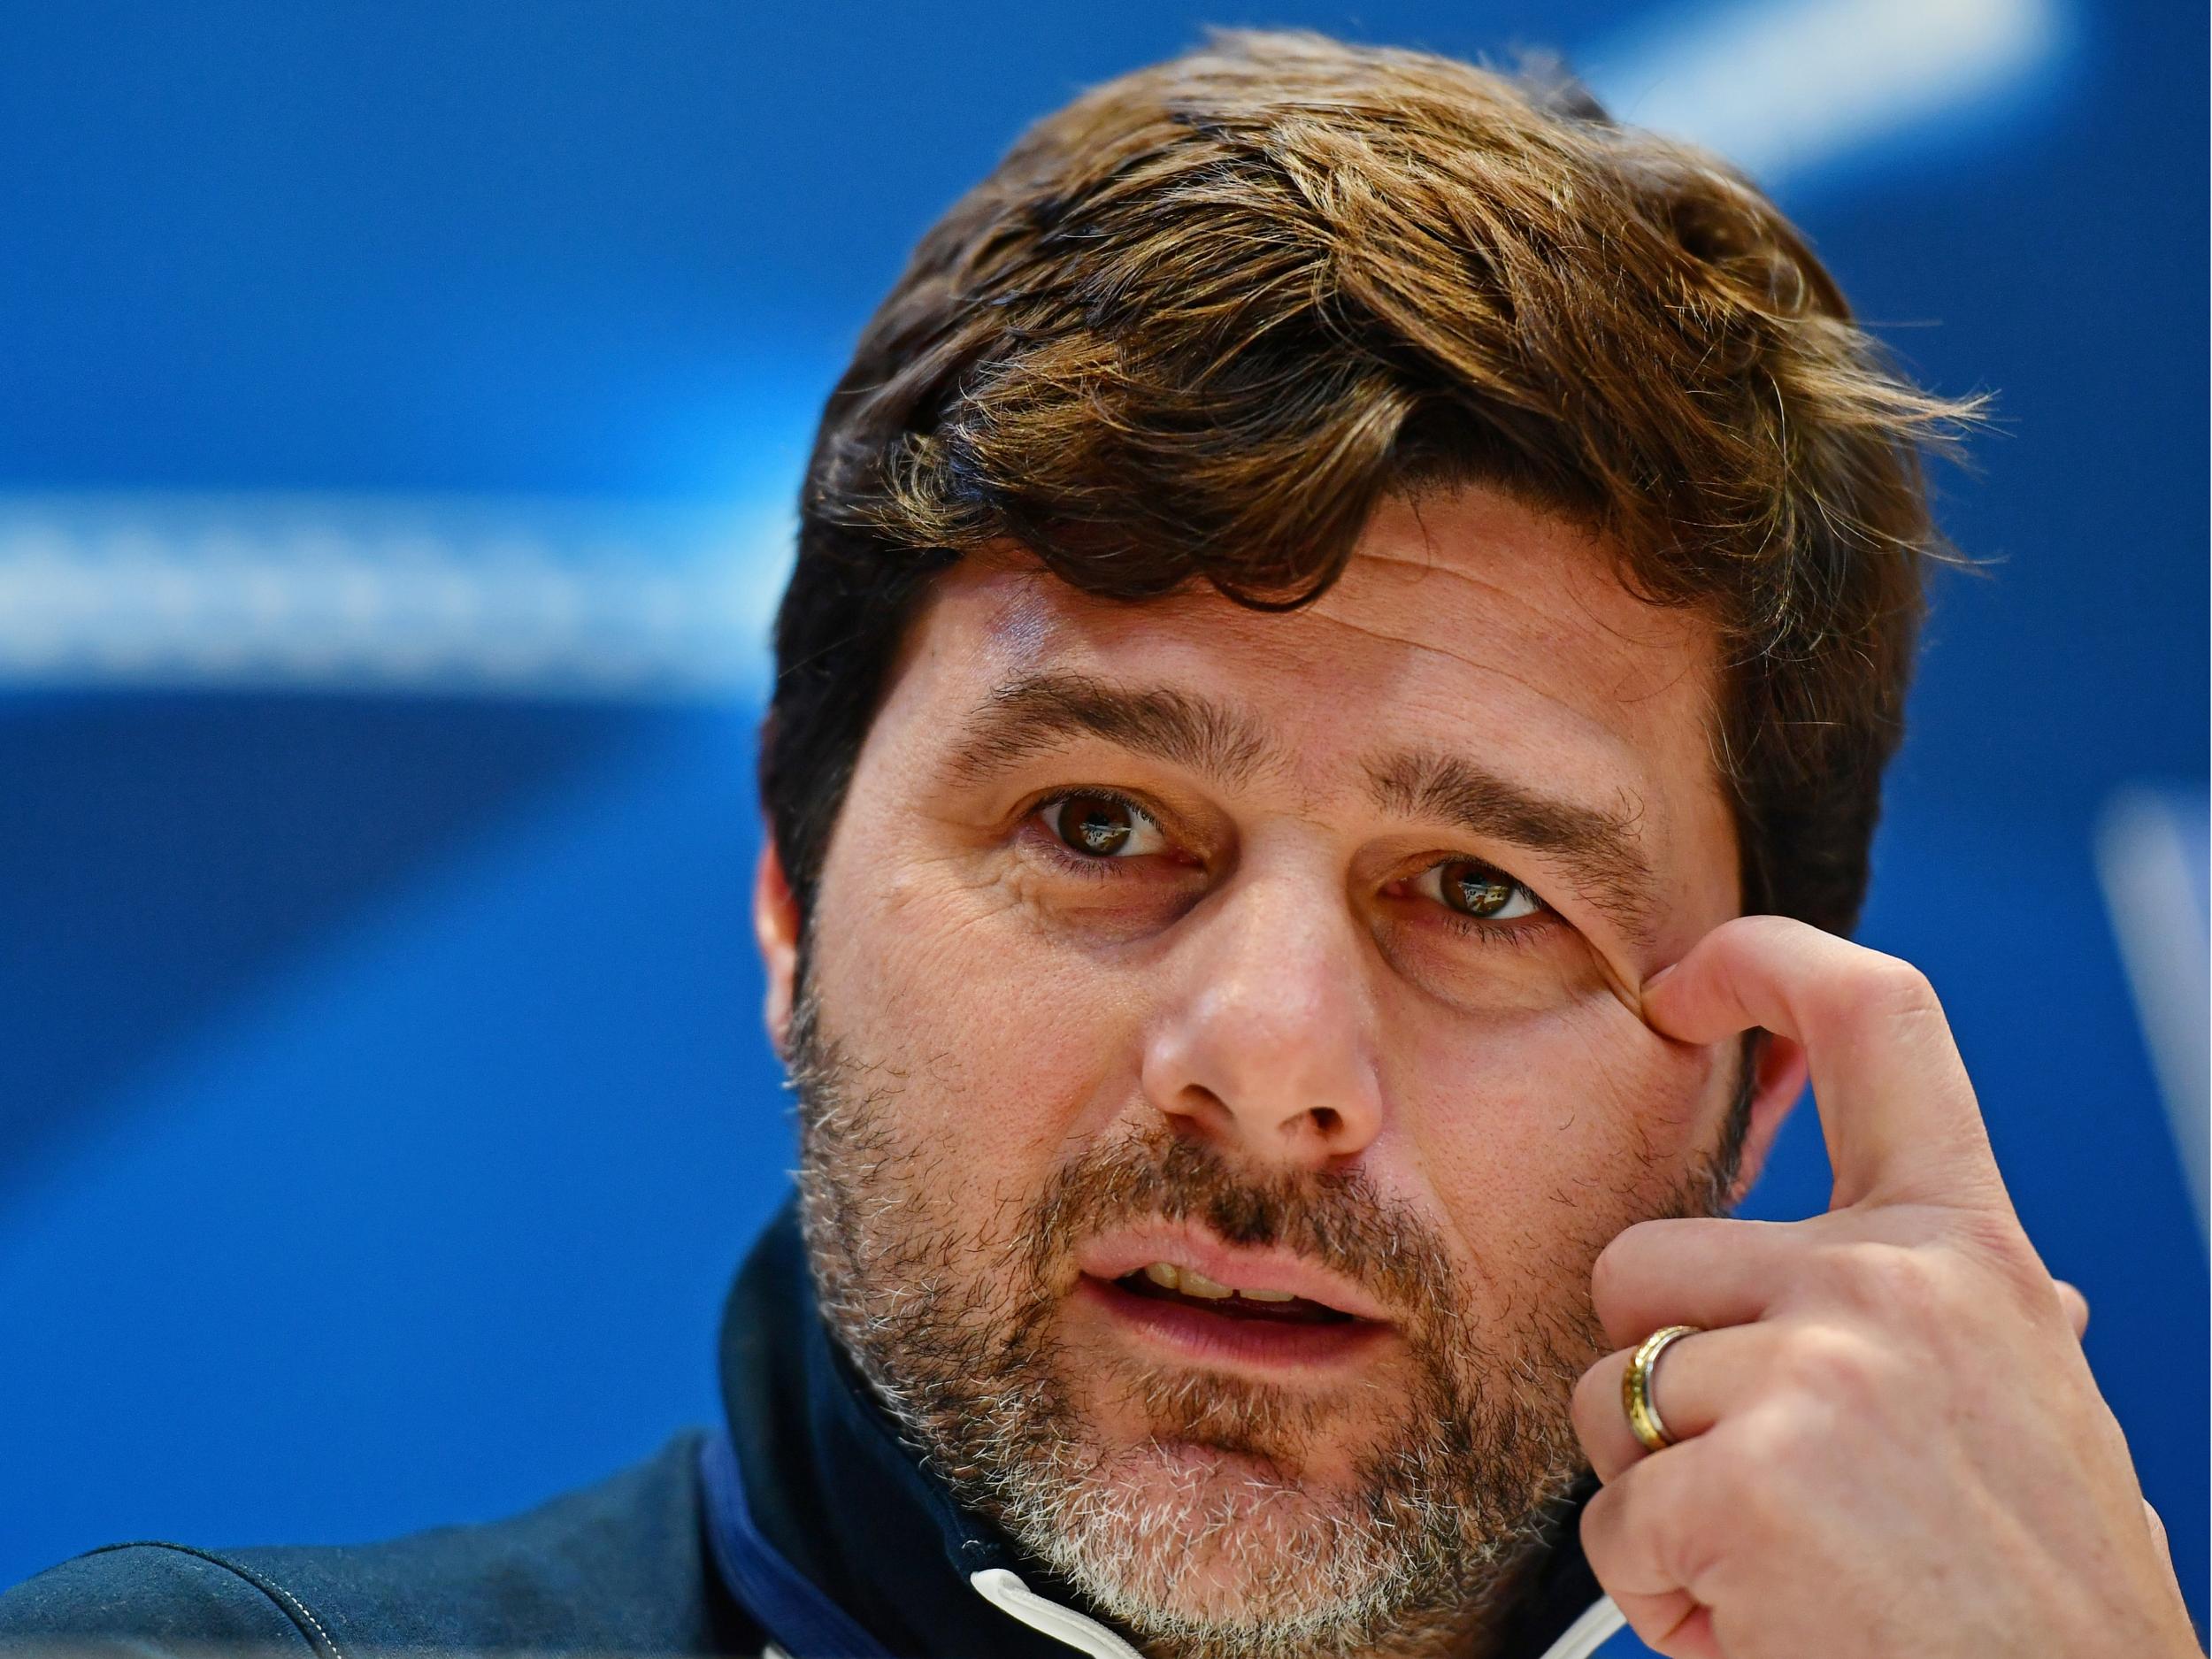 Tottenham crashed out at the group stage last season after facing Monaco, Bayer Leverkusen and CSKA Moscow